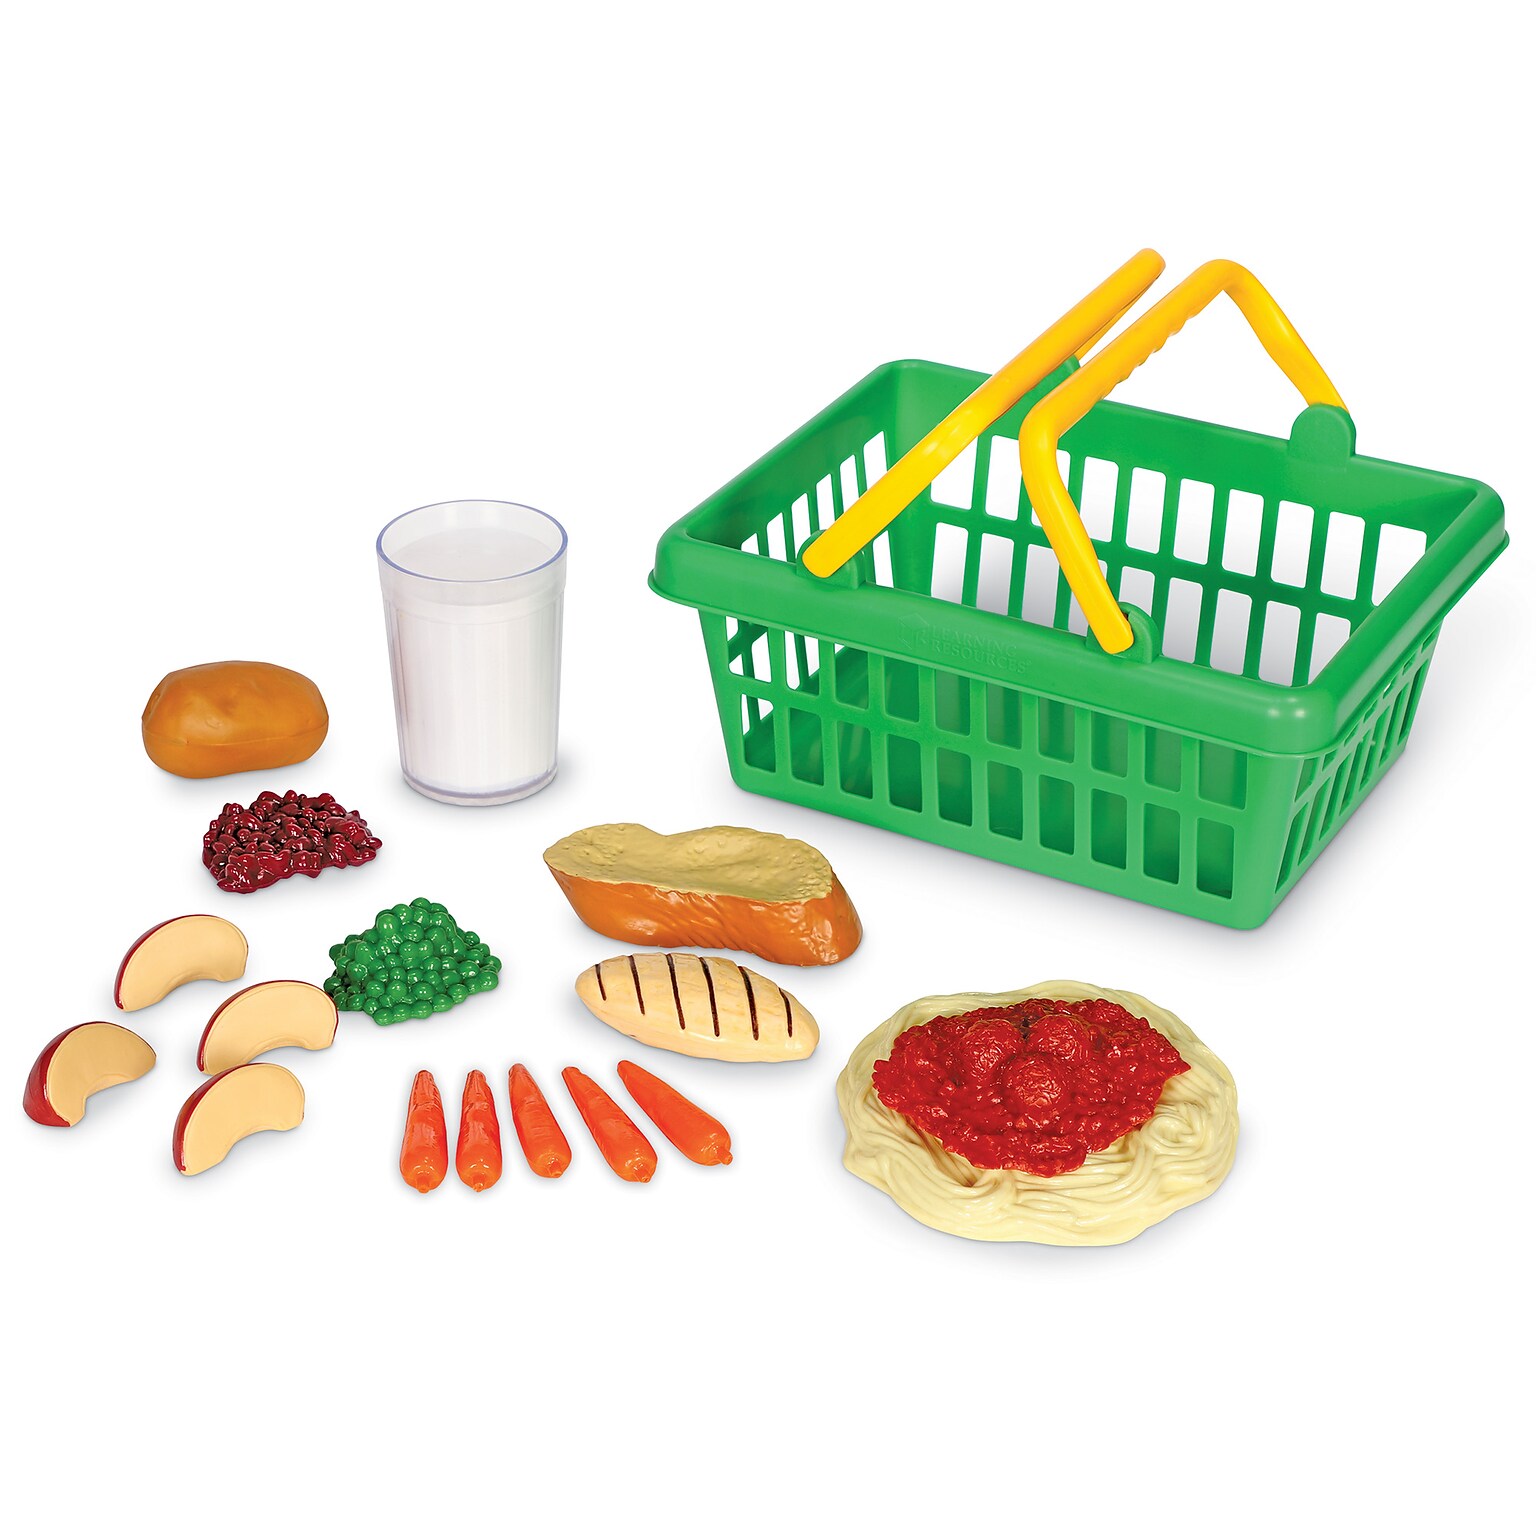 Learning Resources Pretend Food, Pretend & Play, Healthy Dinner Set